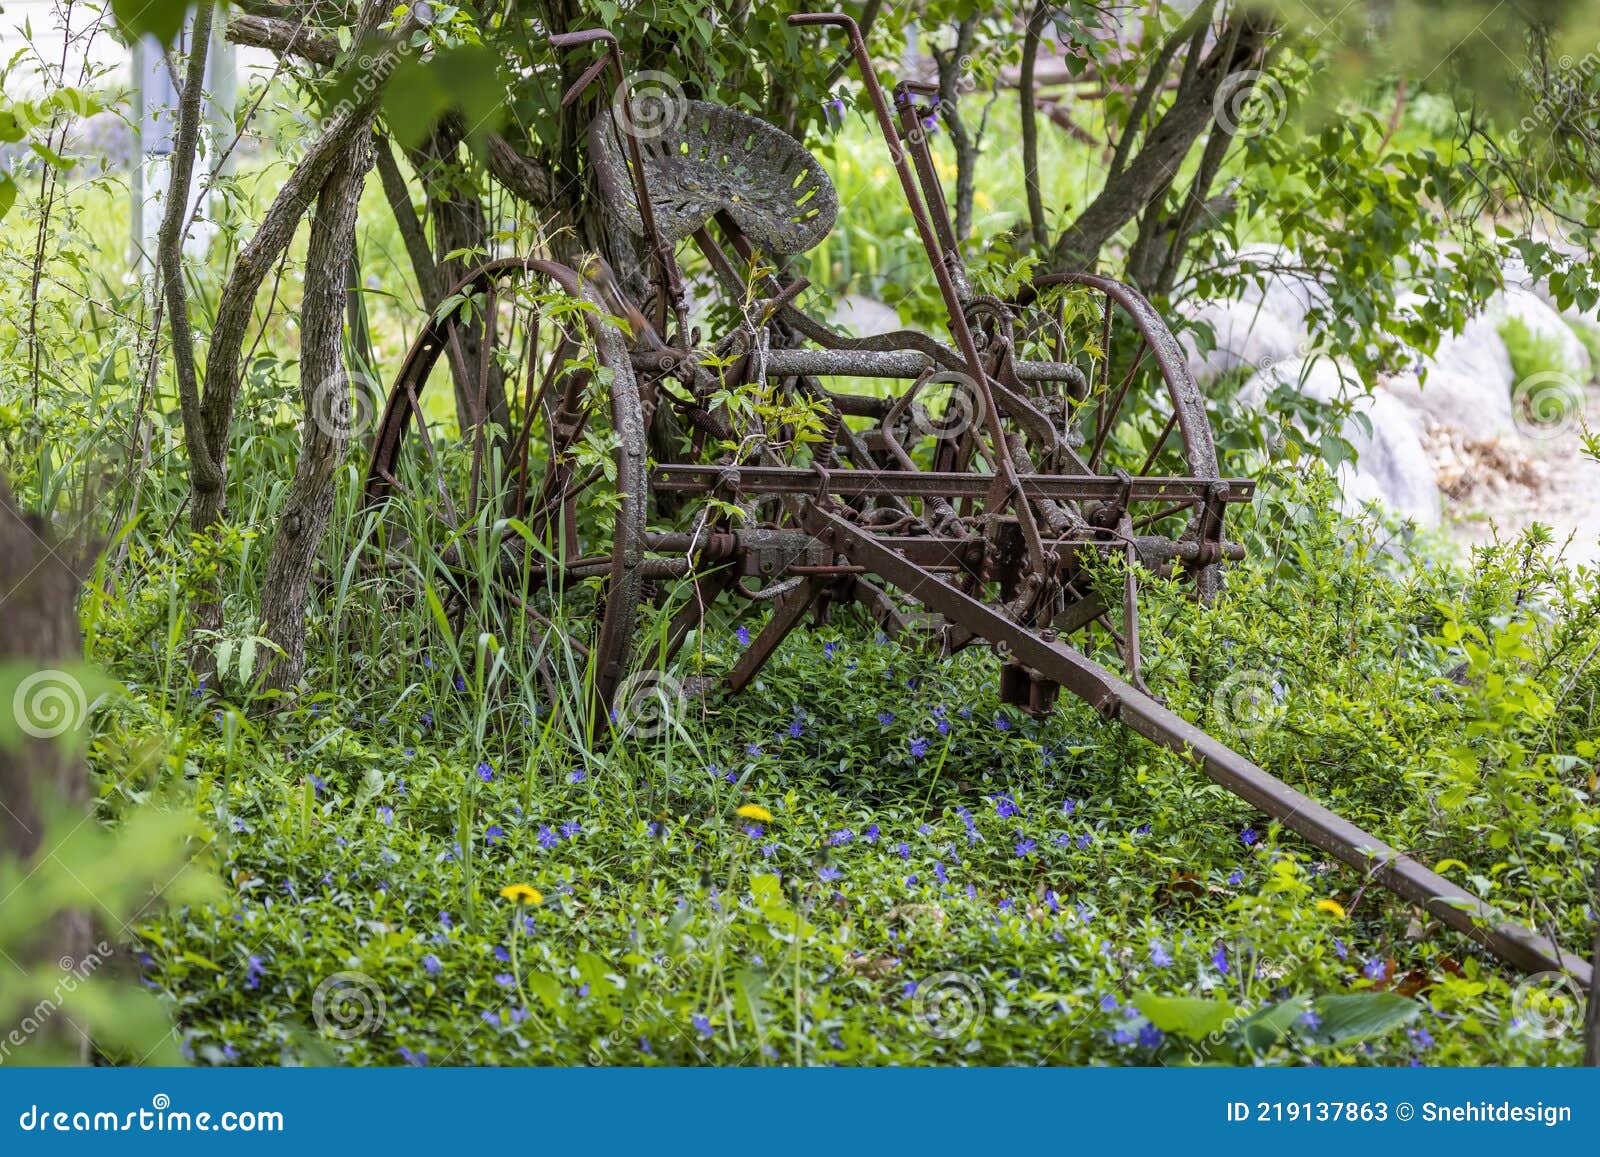 Abandoned Rusty Farm Equipment In The Woods Stock Image Image Of